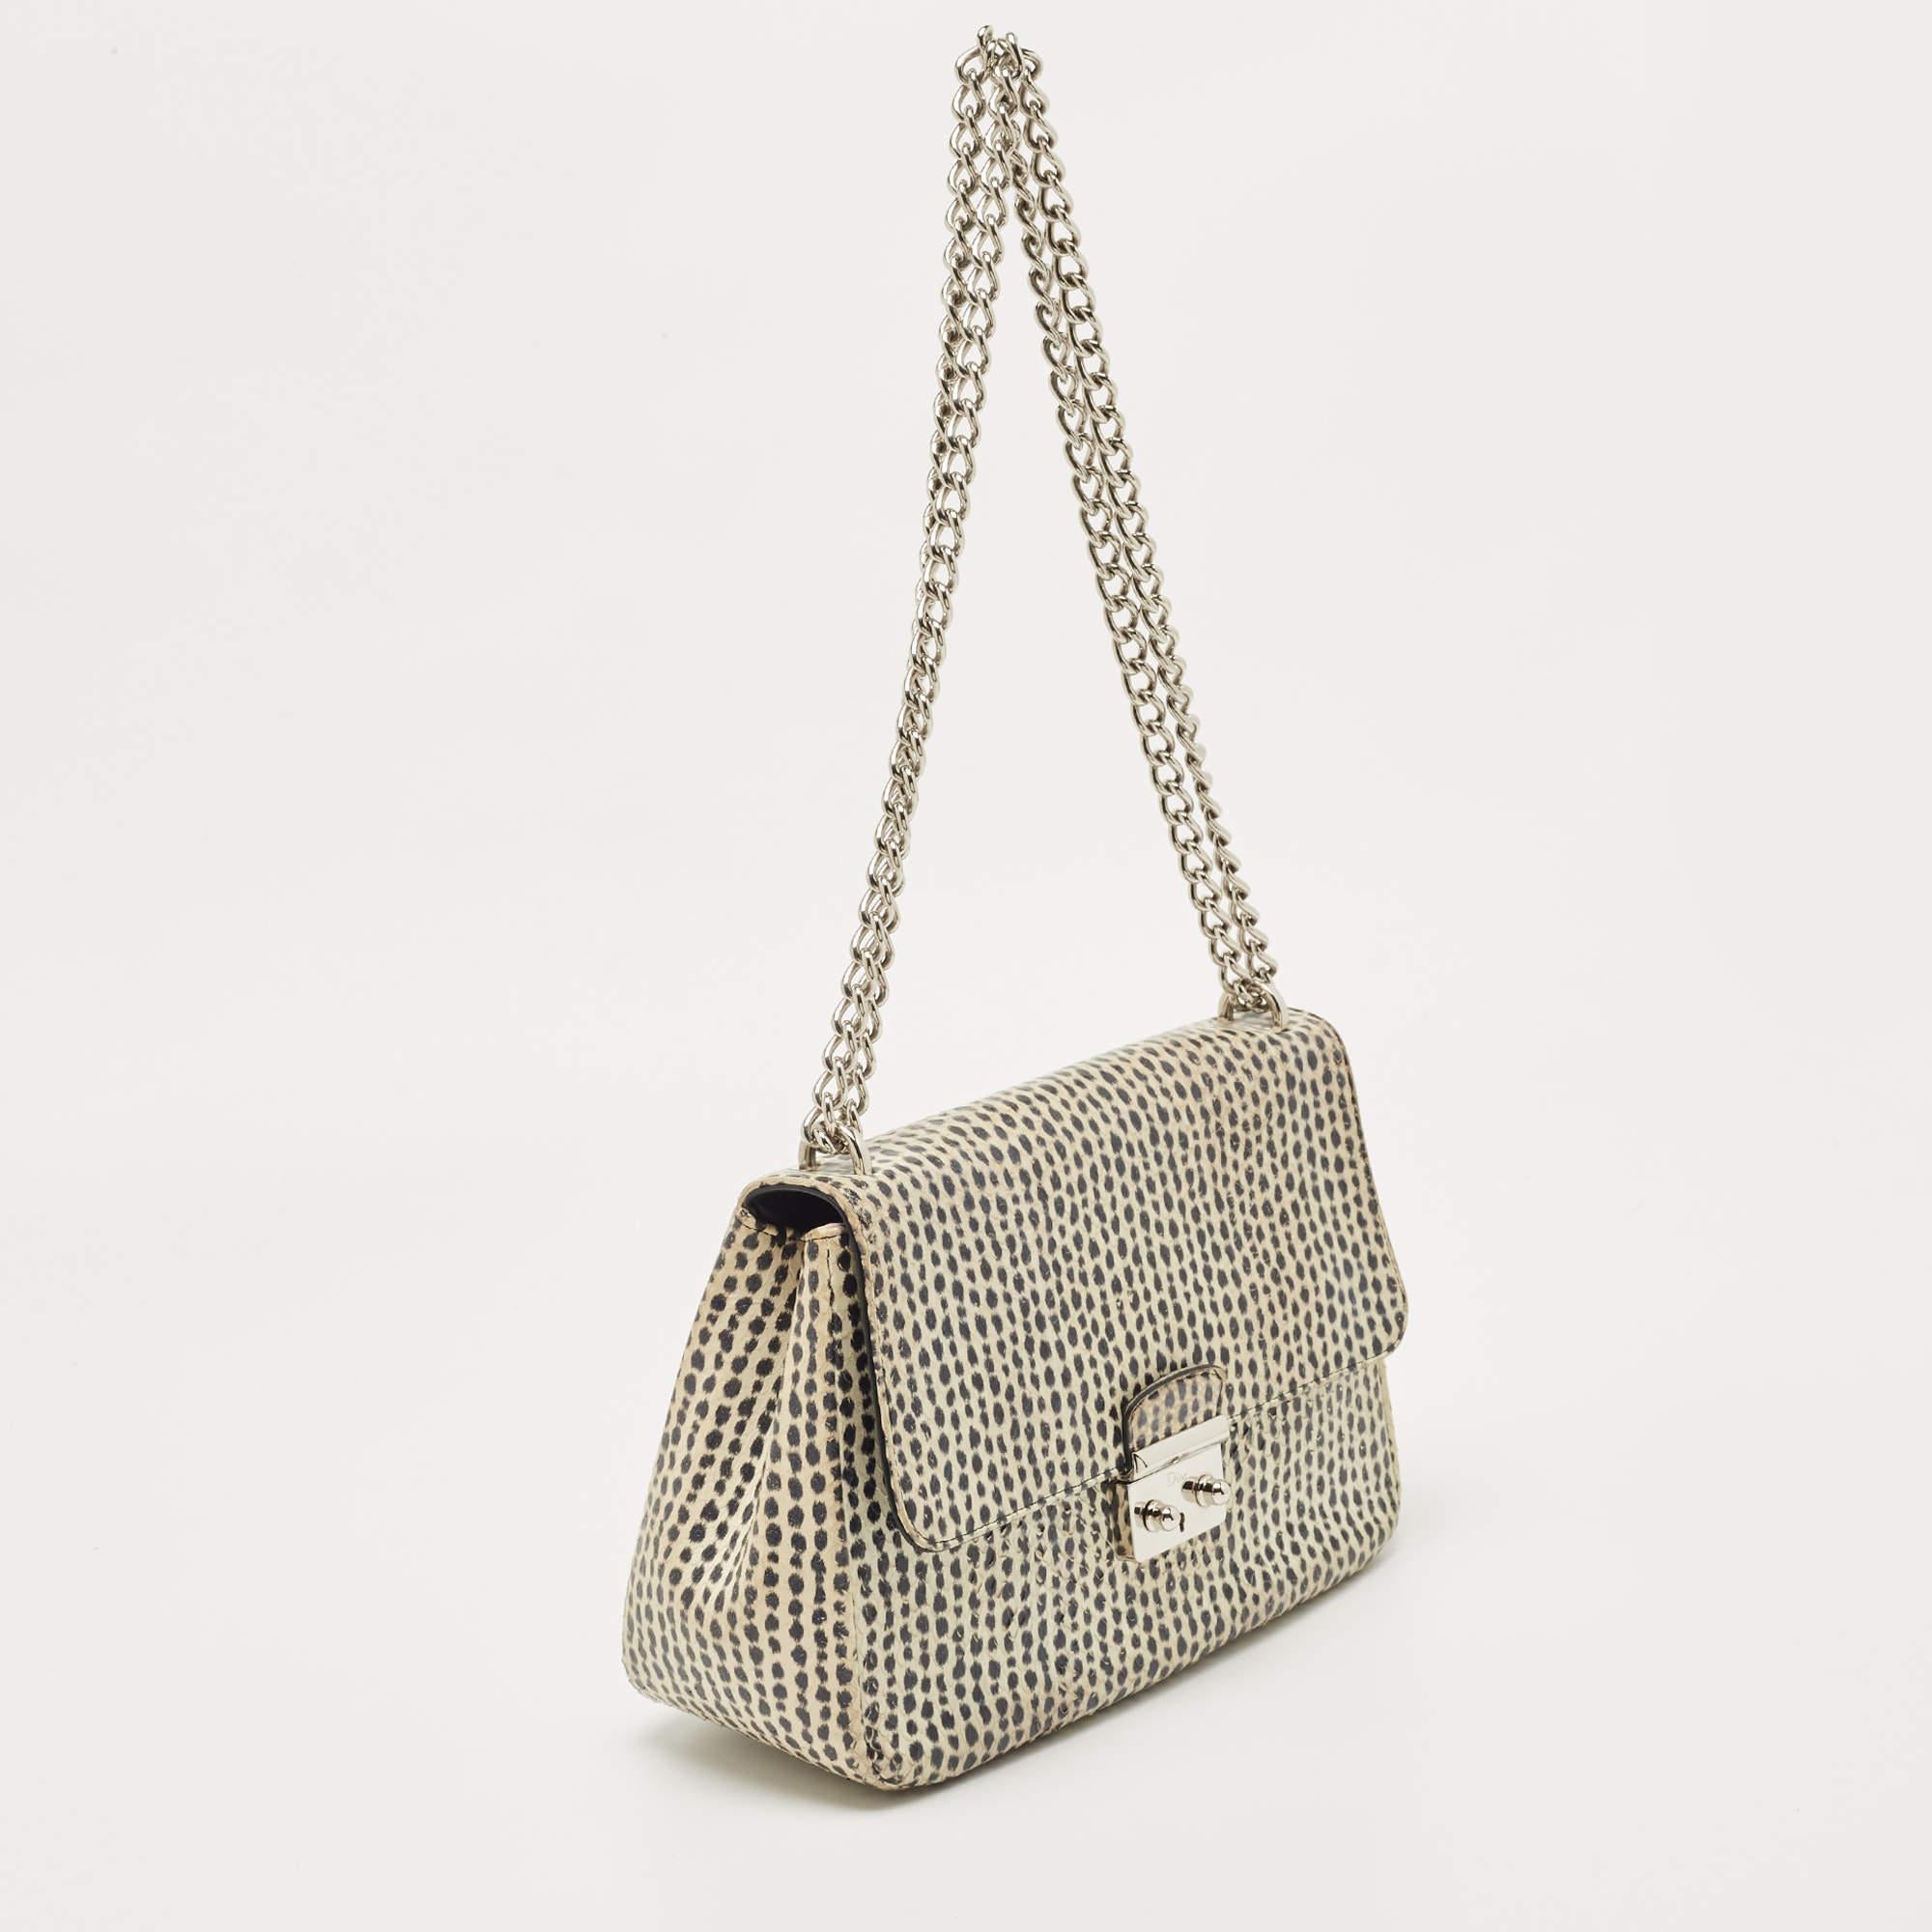 Discover unparalleled style and functionality with this women's shoulder bag. Meticulously designed, it offers a harmonious blend of fashion and practicality, featuring premium materials and versatile compartments for everyday elegance.

